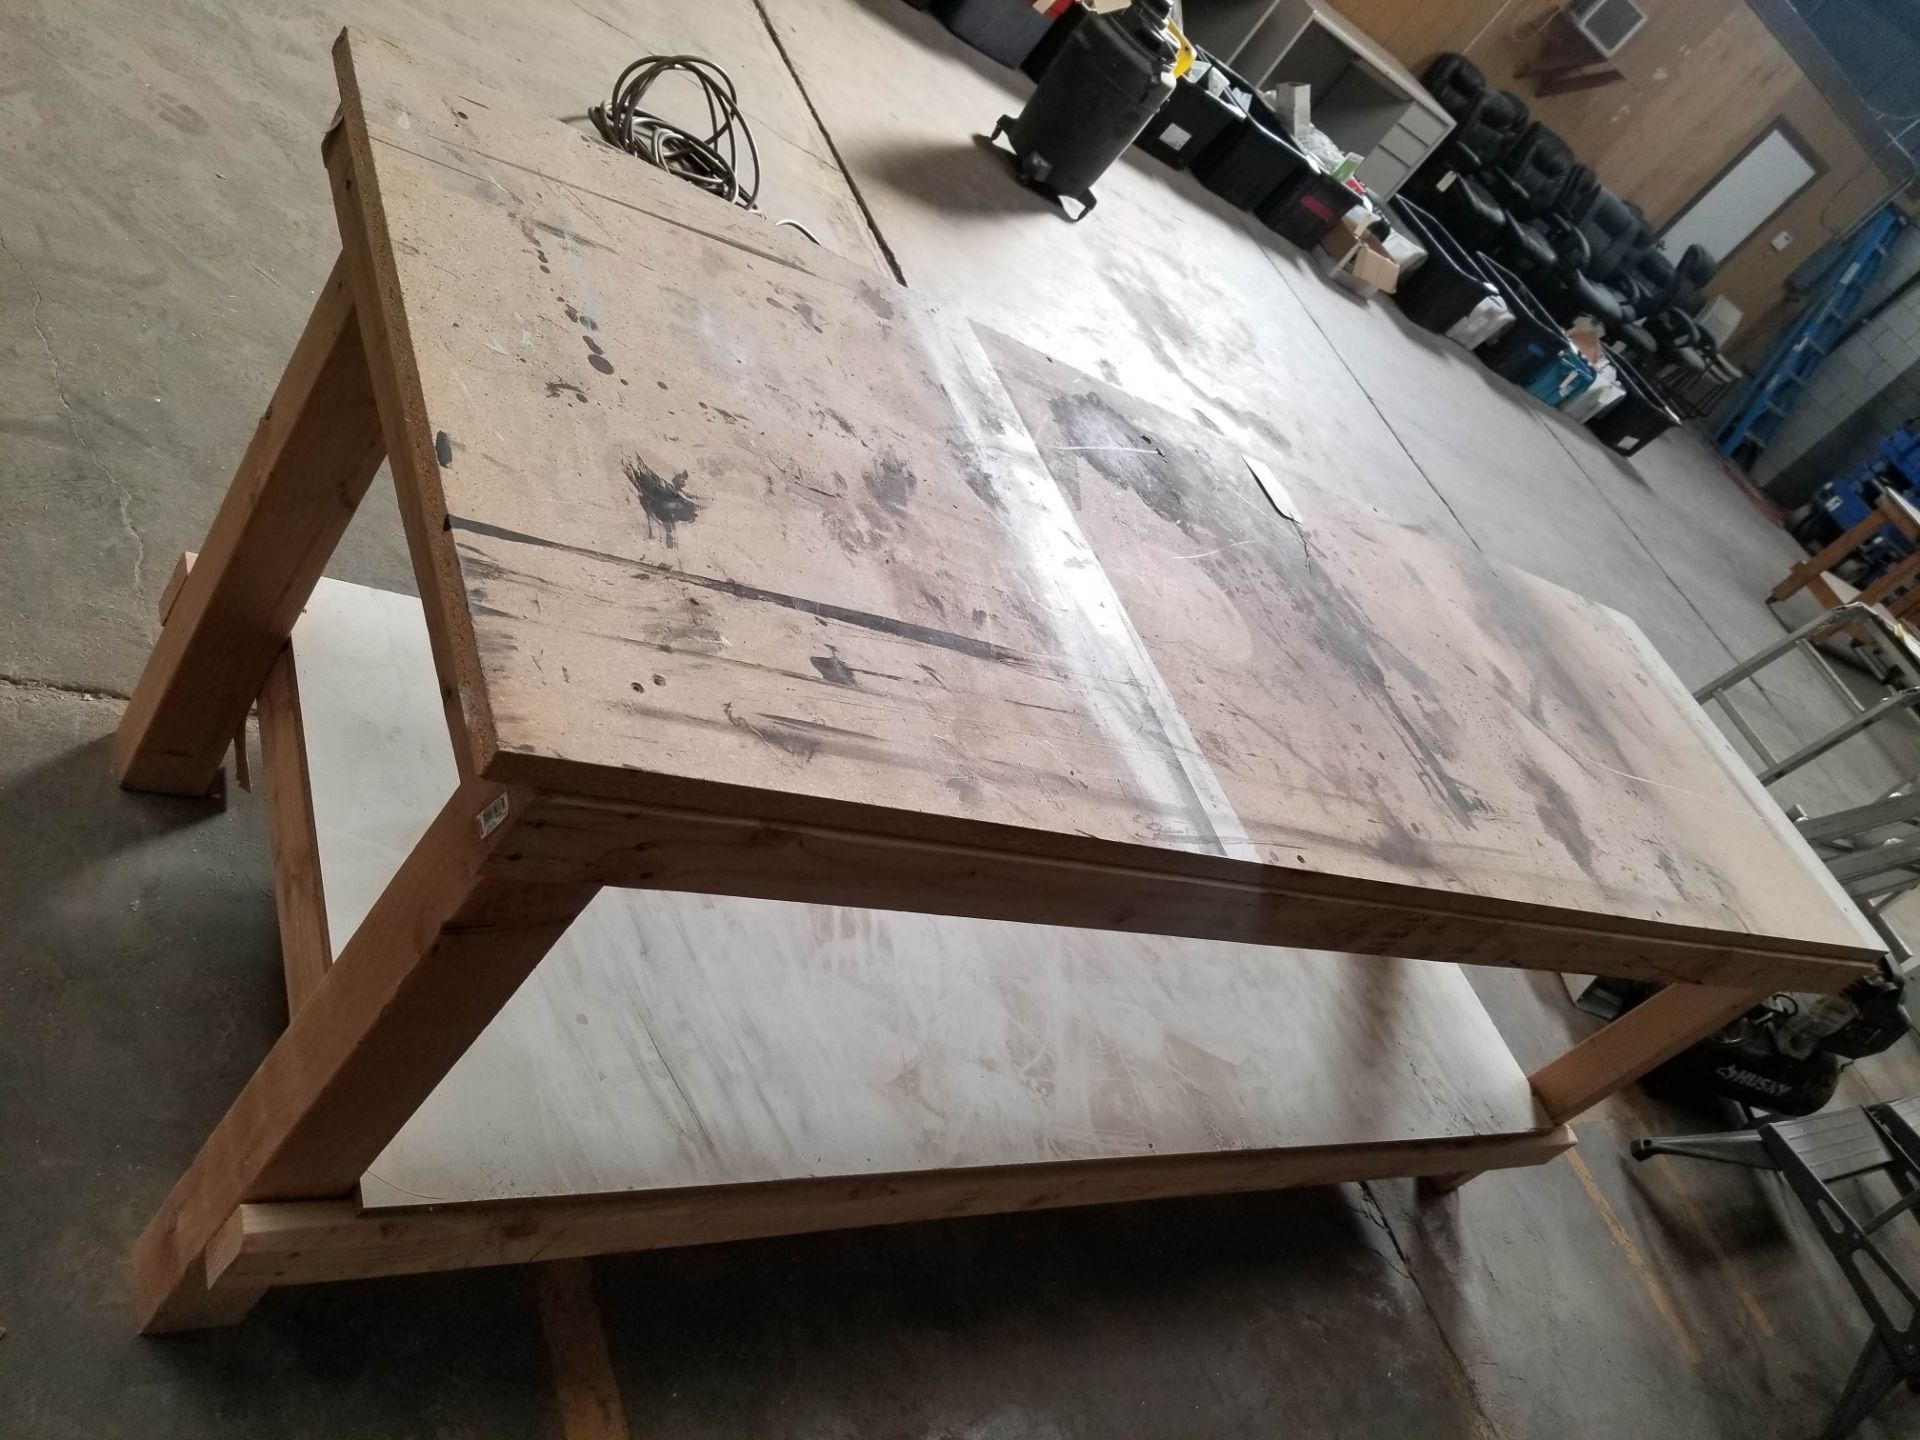 Shop Work Table 97"x30"x35" - Image 2 of 2